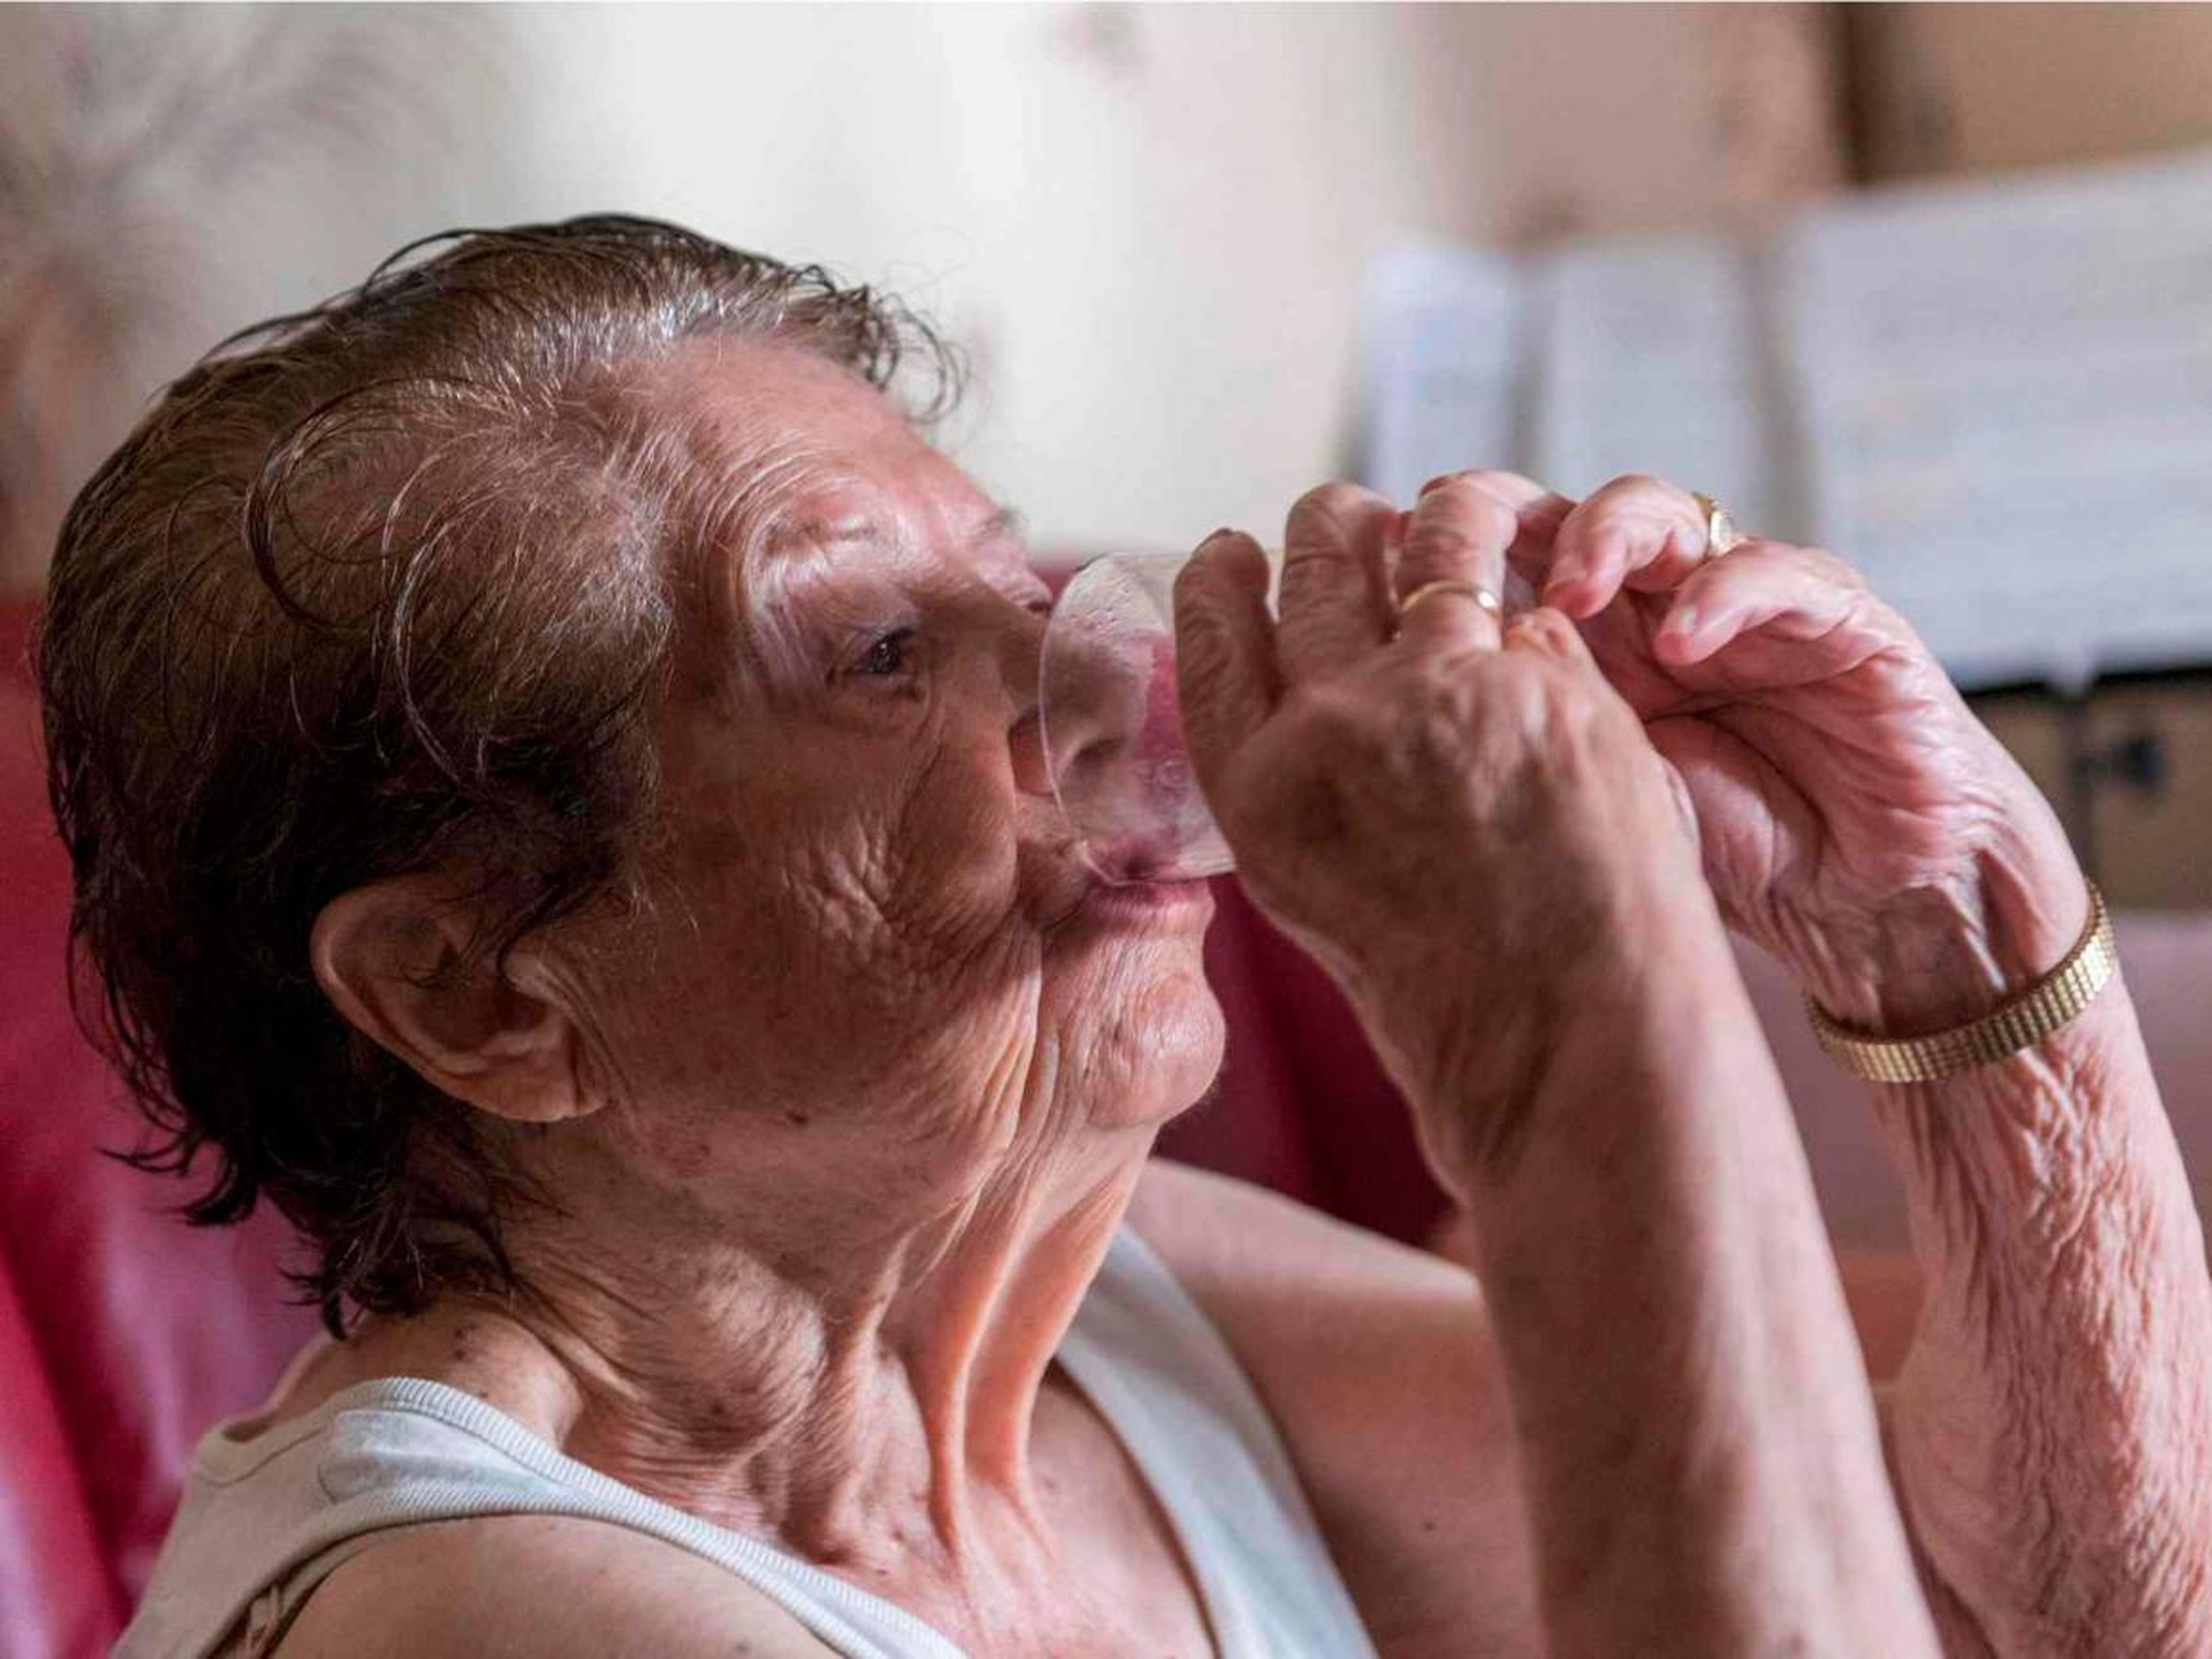 An elderly person drinks a glass of water.